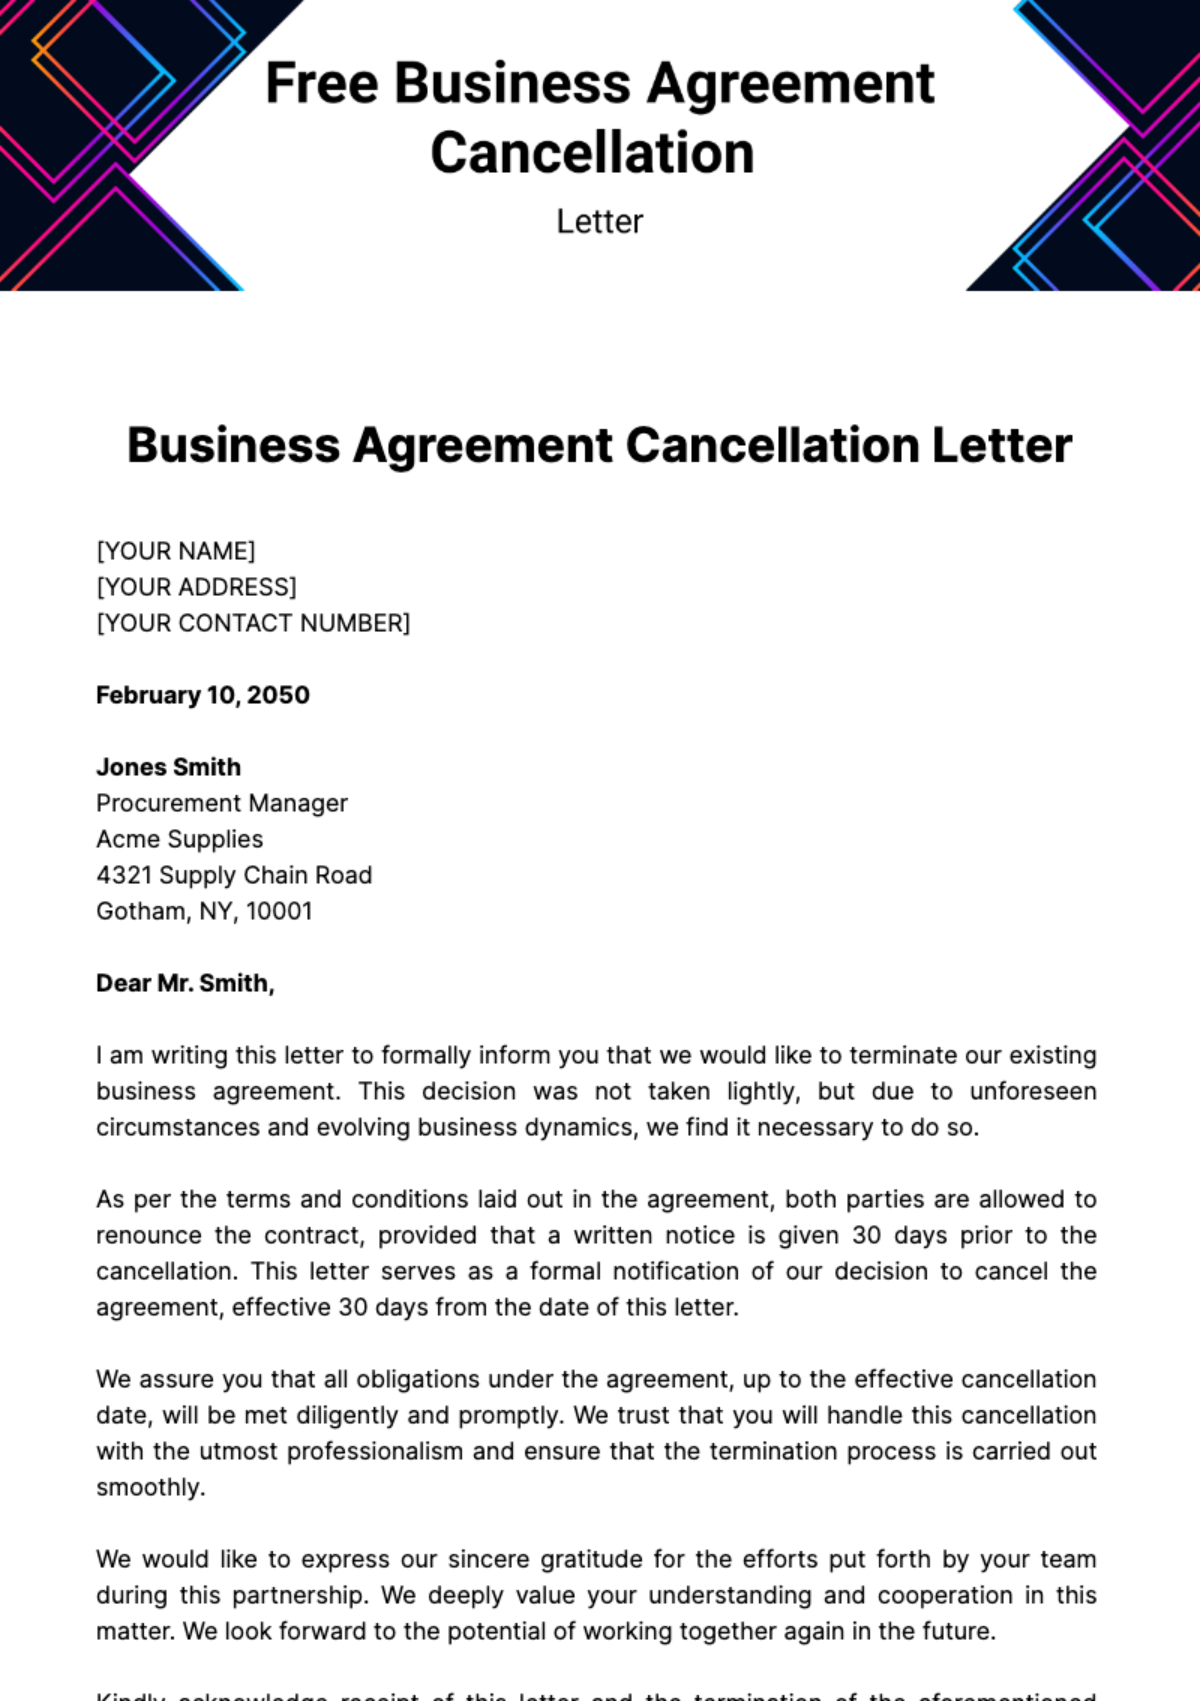 Free Business Agreement Cancellation Letter Template